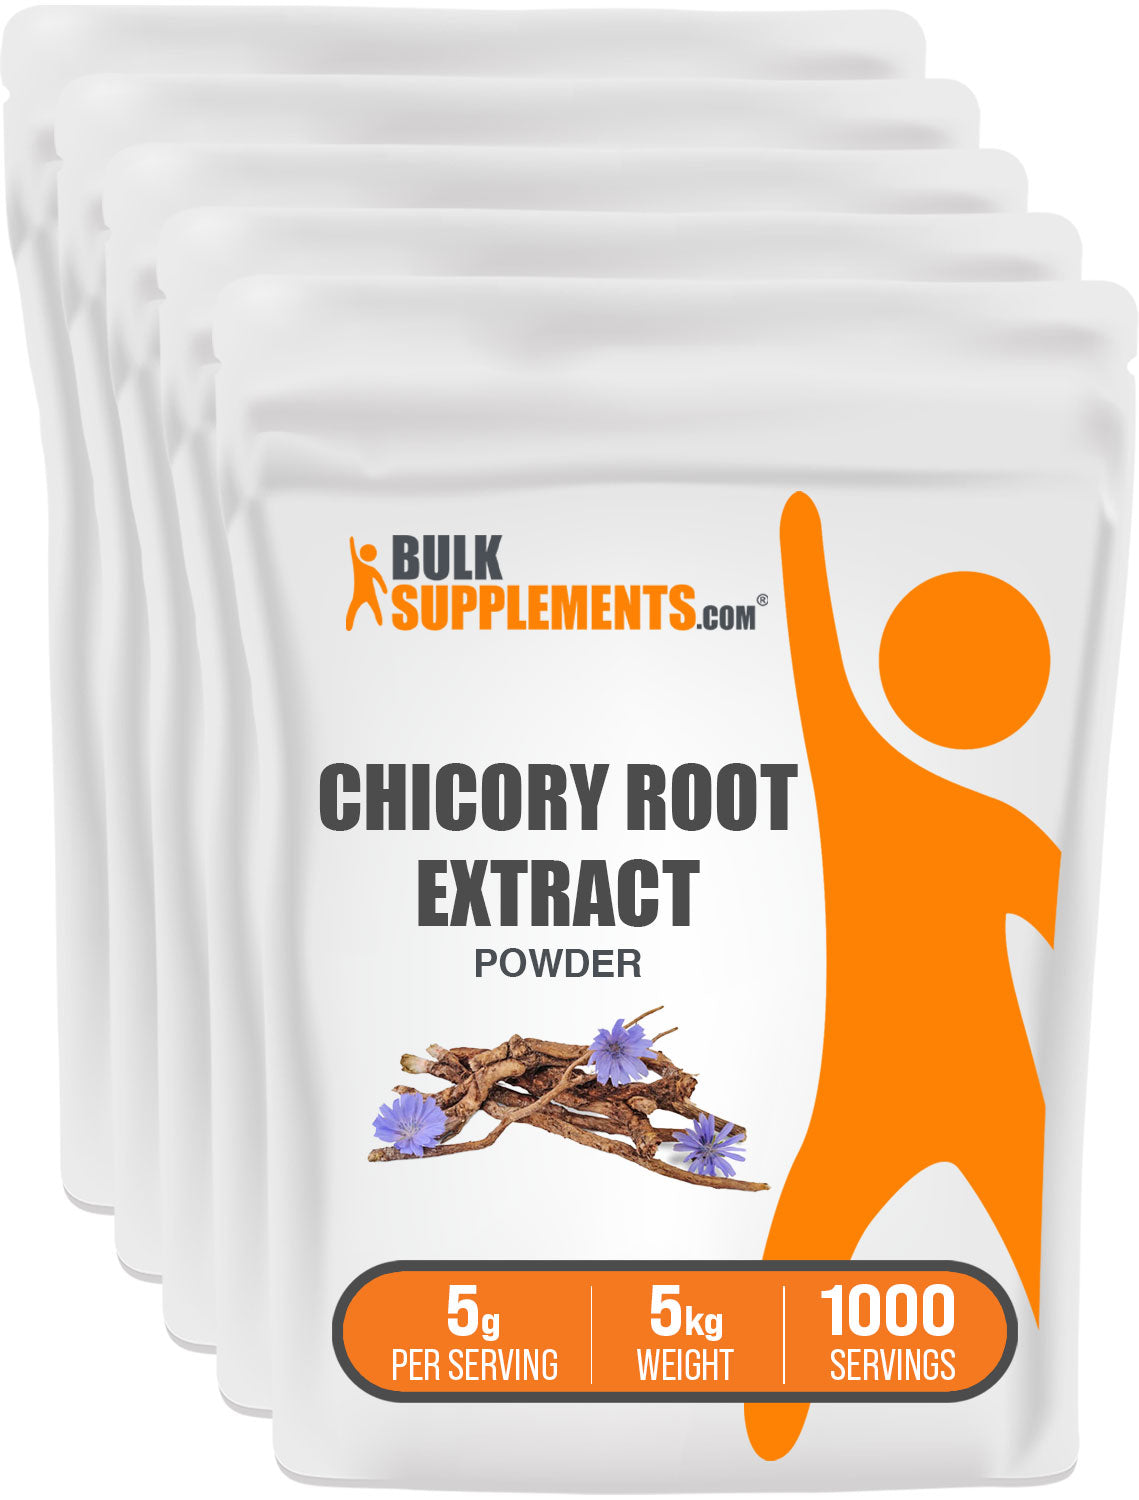 BulkSupplements Chicory Root Extract Powder 5 Kilograms set of 5 bags